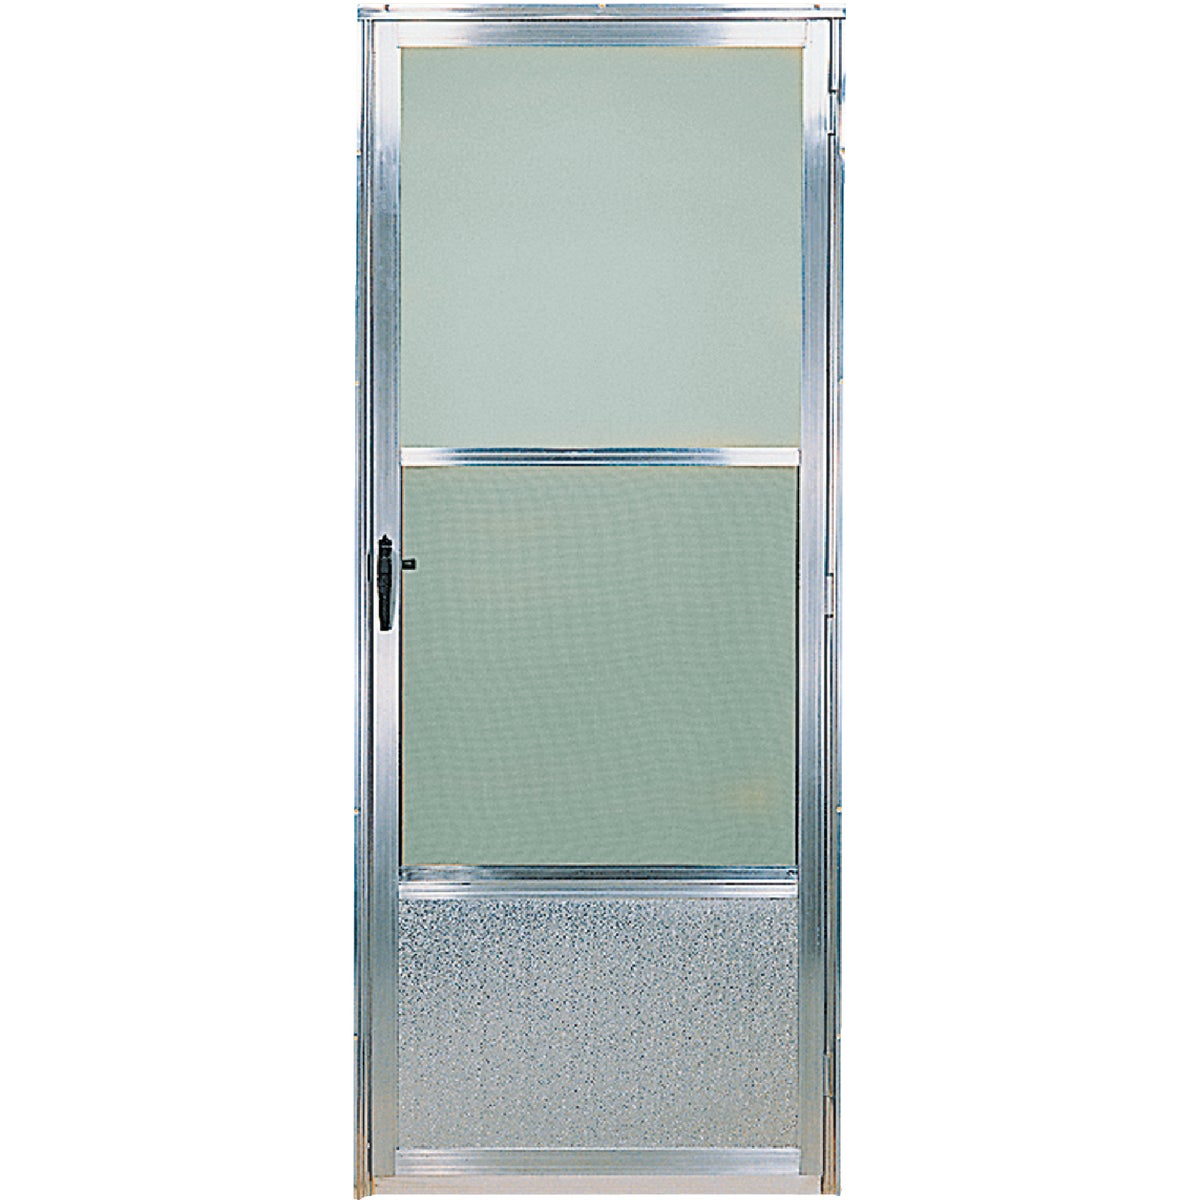 Croft Imperial Style 30 In. W x 80 In. H x 1 In. Thick Mill Self-Storing Aluminum Storm Door